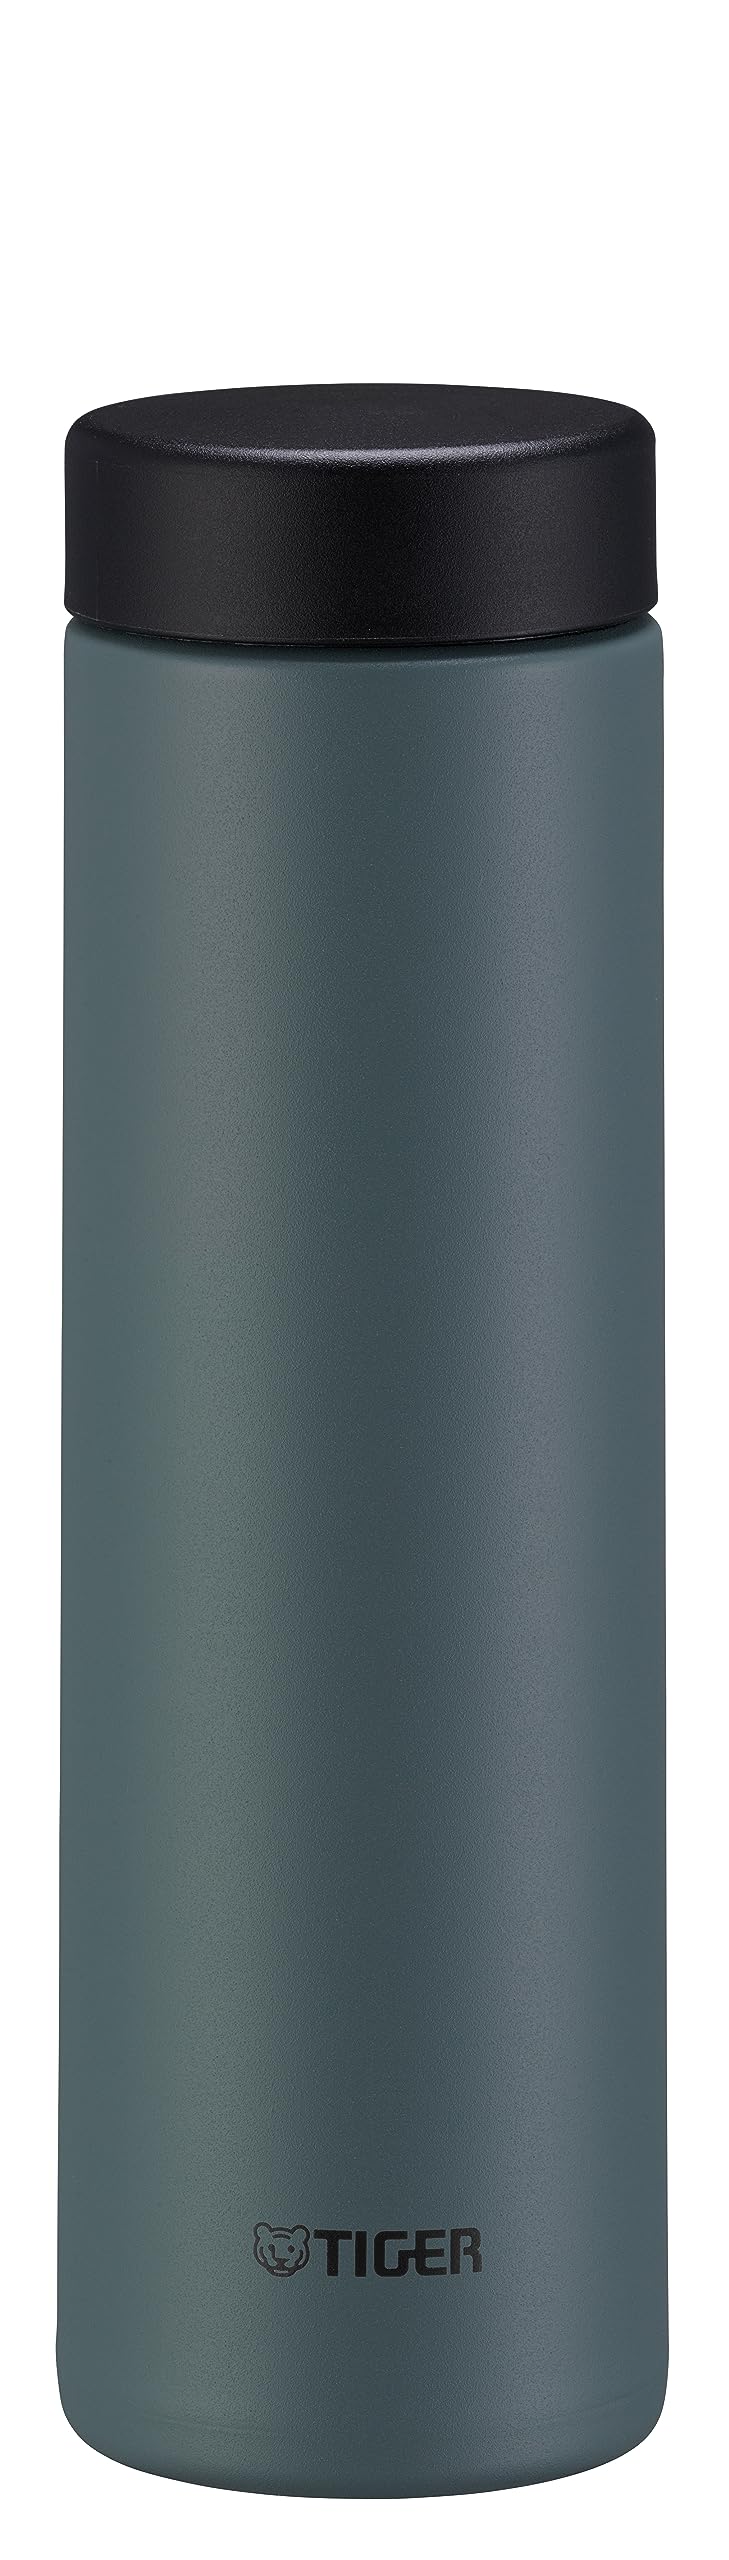 Tiger Thermos 500ml Stainless Steel Vacuum Insulated Mmz-W050Gw